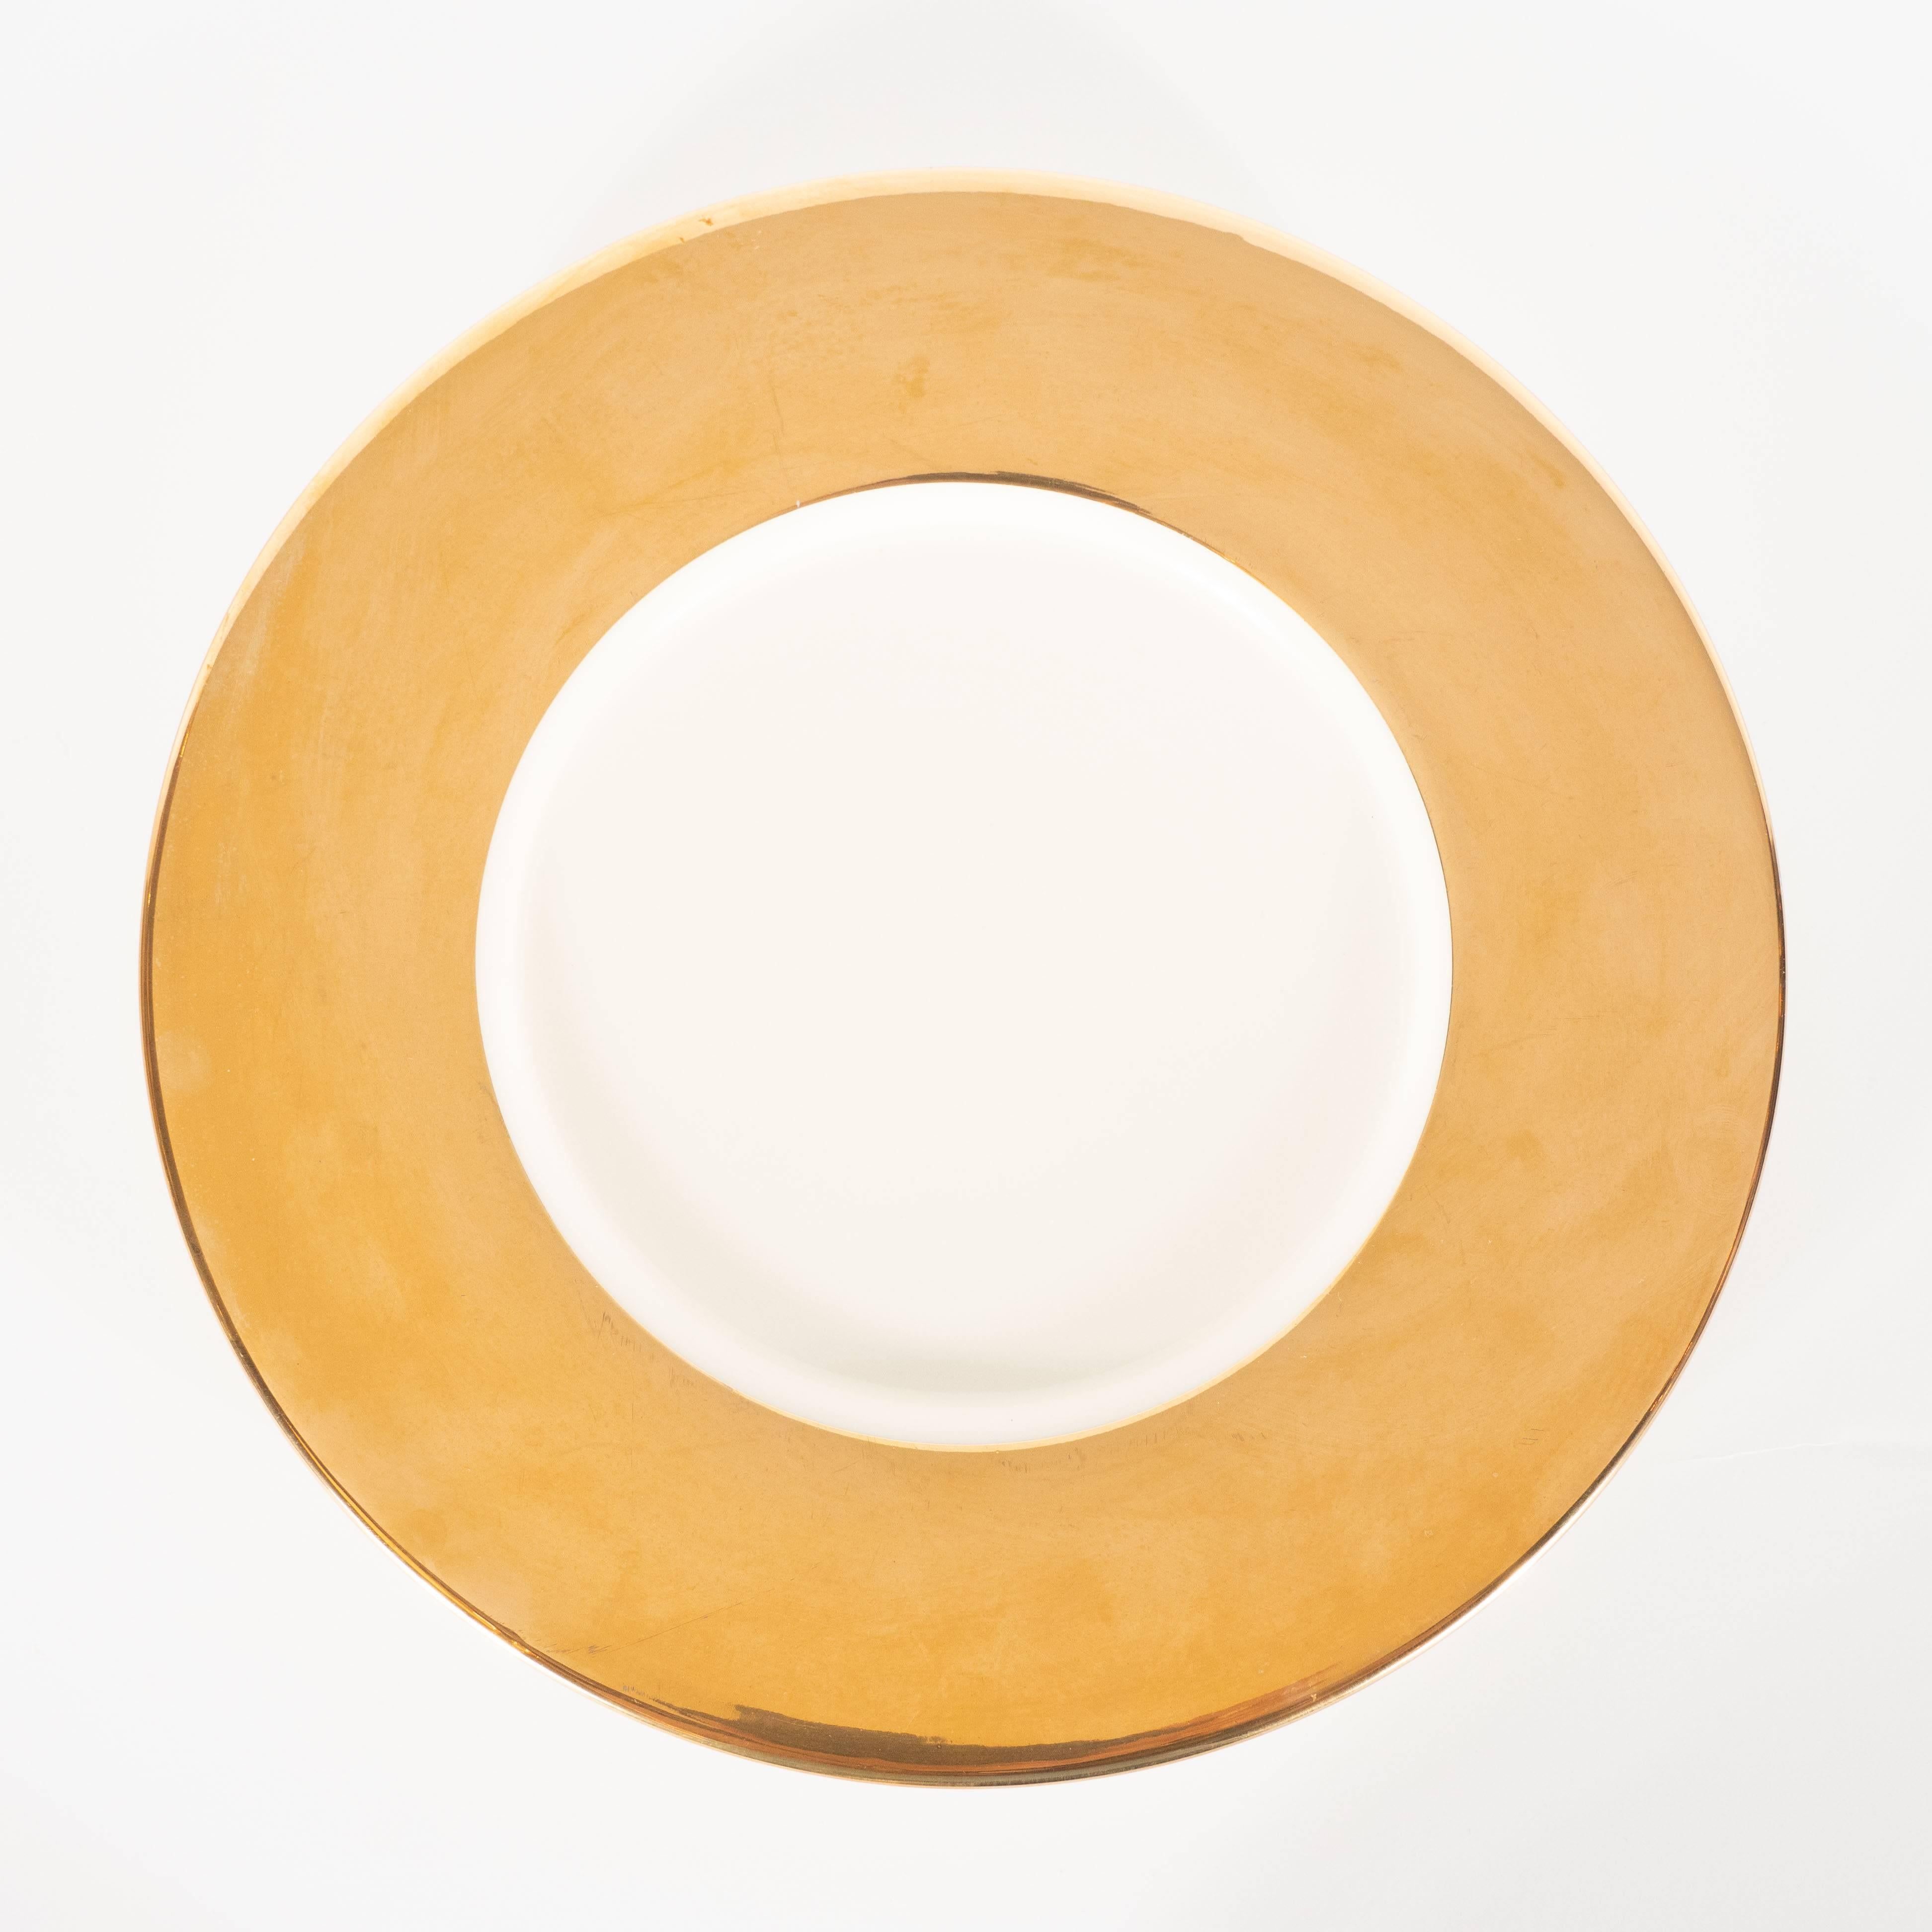 These stunning charger plates were realized by the esteemed American producer, Lenox, circa 1980. They offer porcelain centres in a rich bone surrounded by 24-karat yellow gold. Founded in 1889, by Walter Scott Lenox, the brand has pursued their